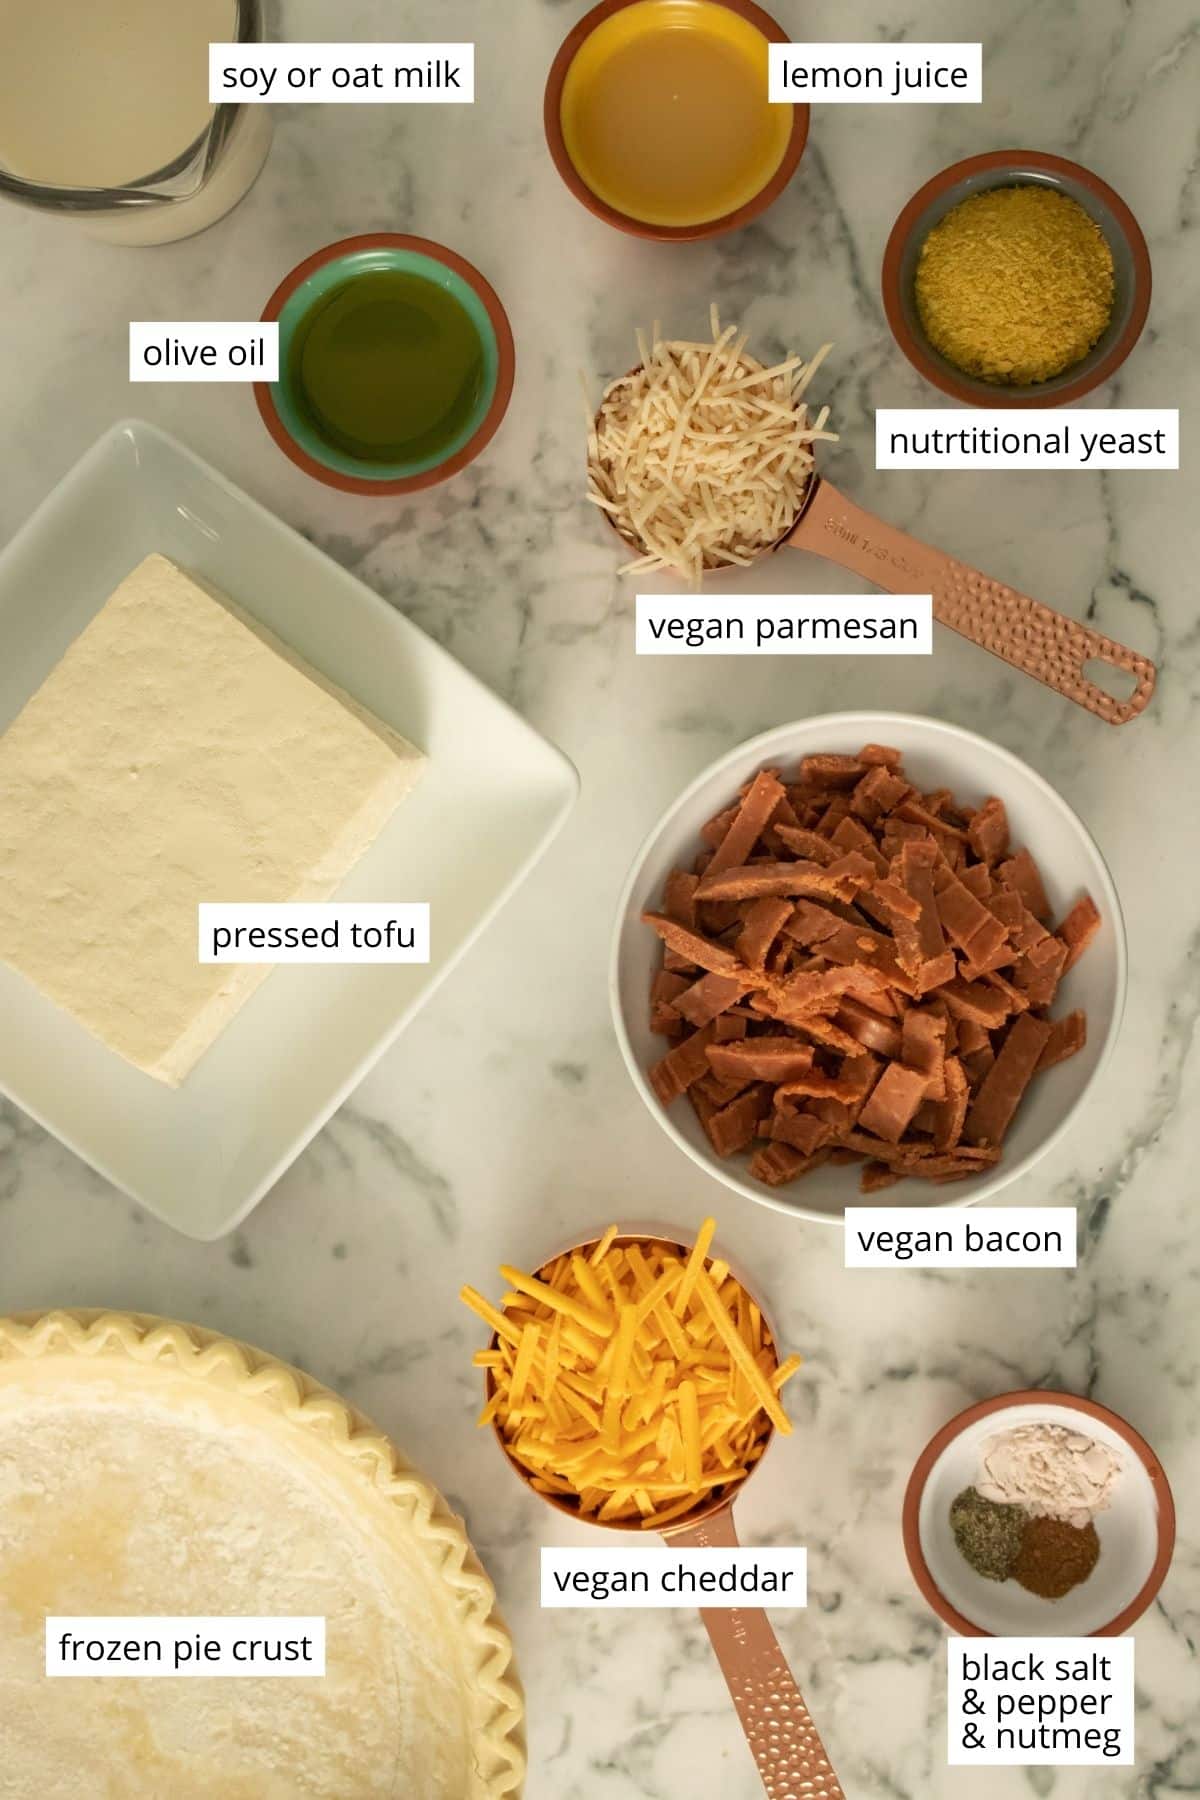 tofu, vegan bacon, and other quiche ingredients arranged on a marble table